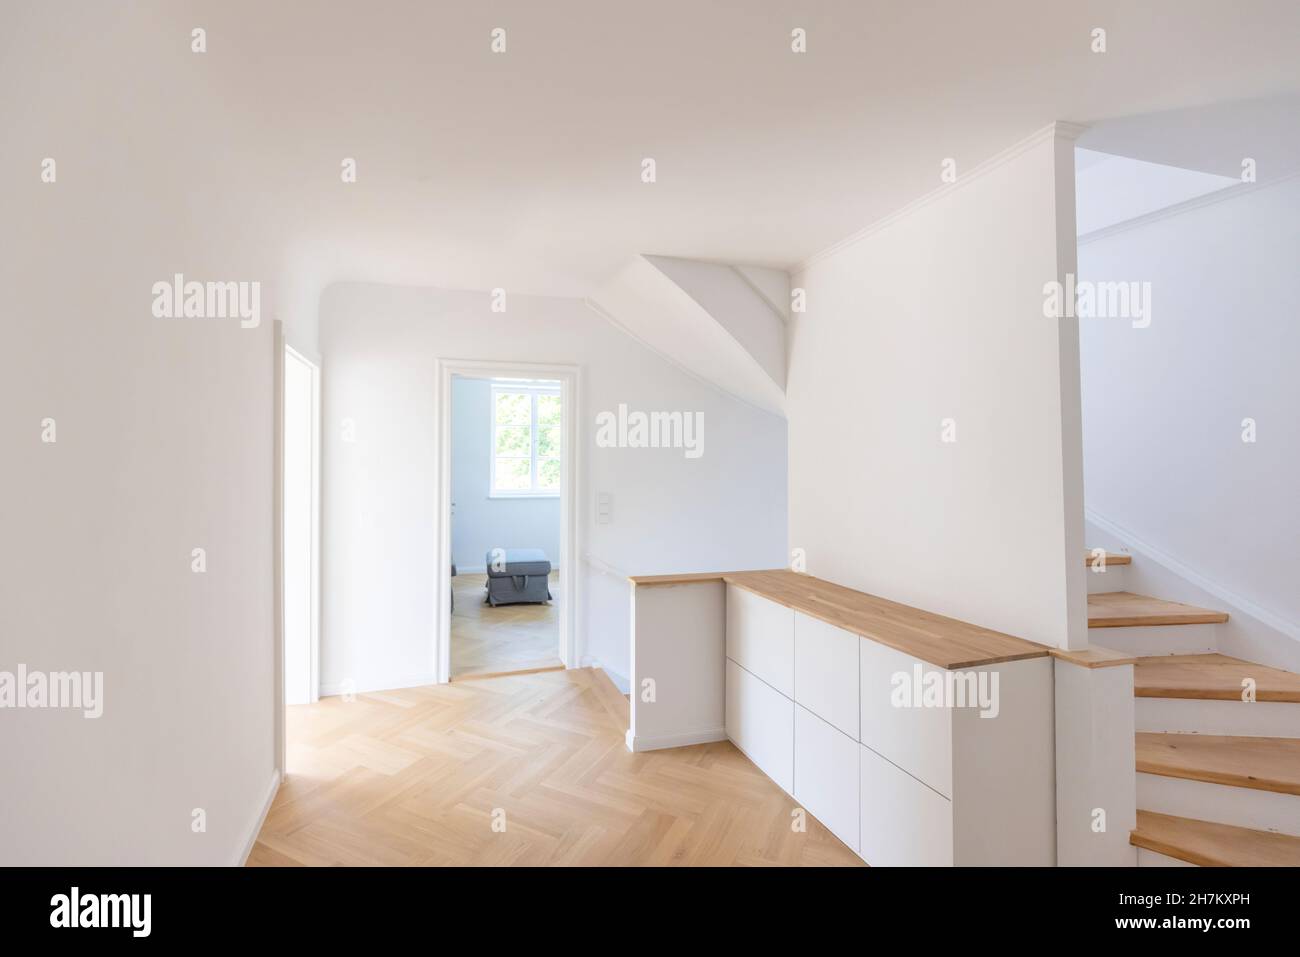 Clean unfurnished home interior with white walls and parquet floor Stock Photo